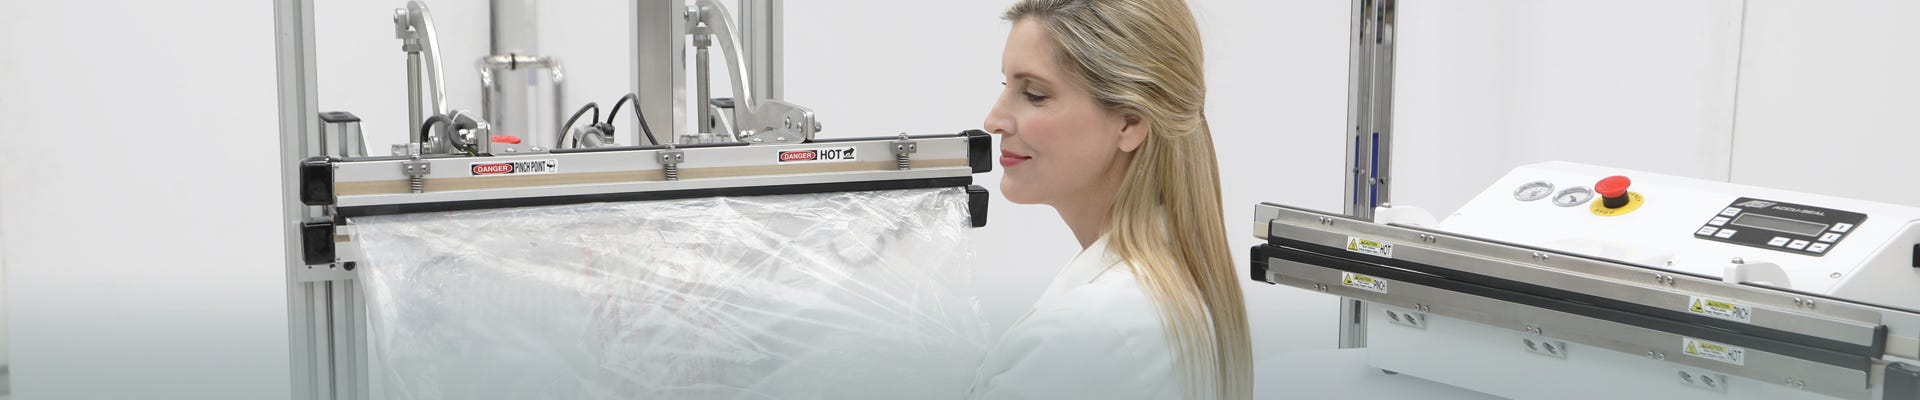 Store and transport sensitive materials, vacuum sealers protect for particles, humidity and oxygen, ensuring sample integrity